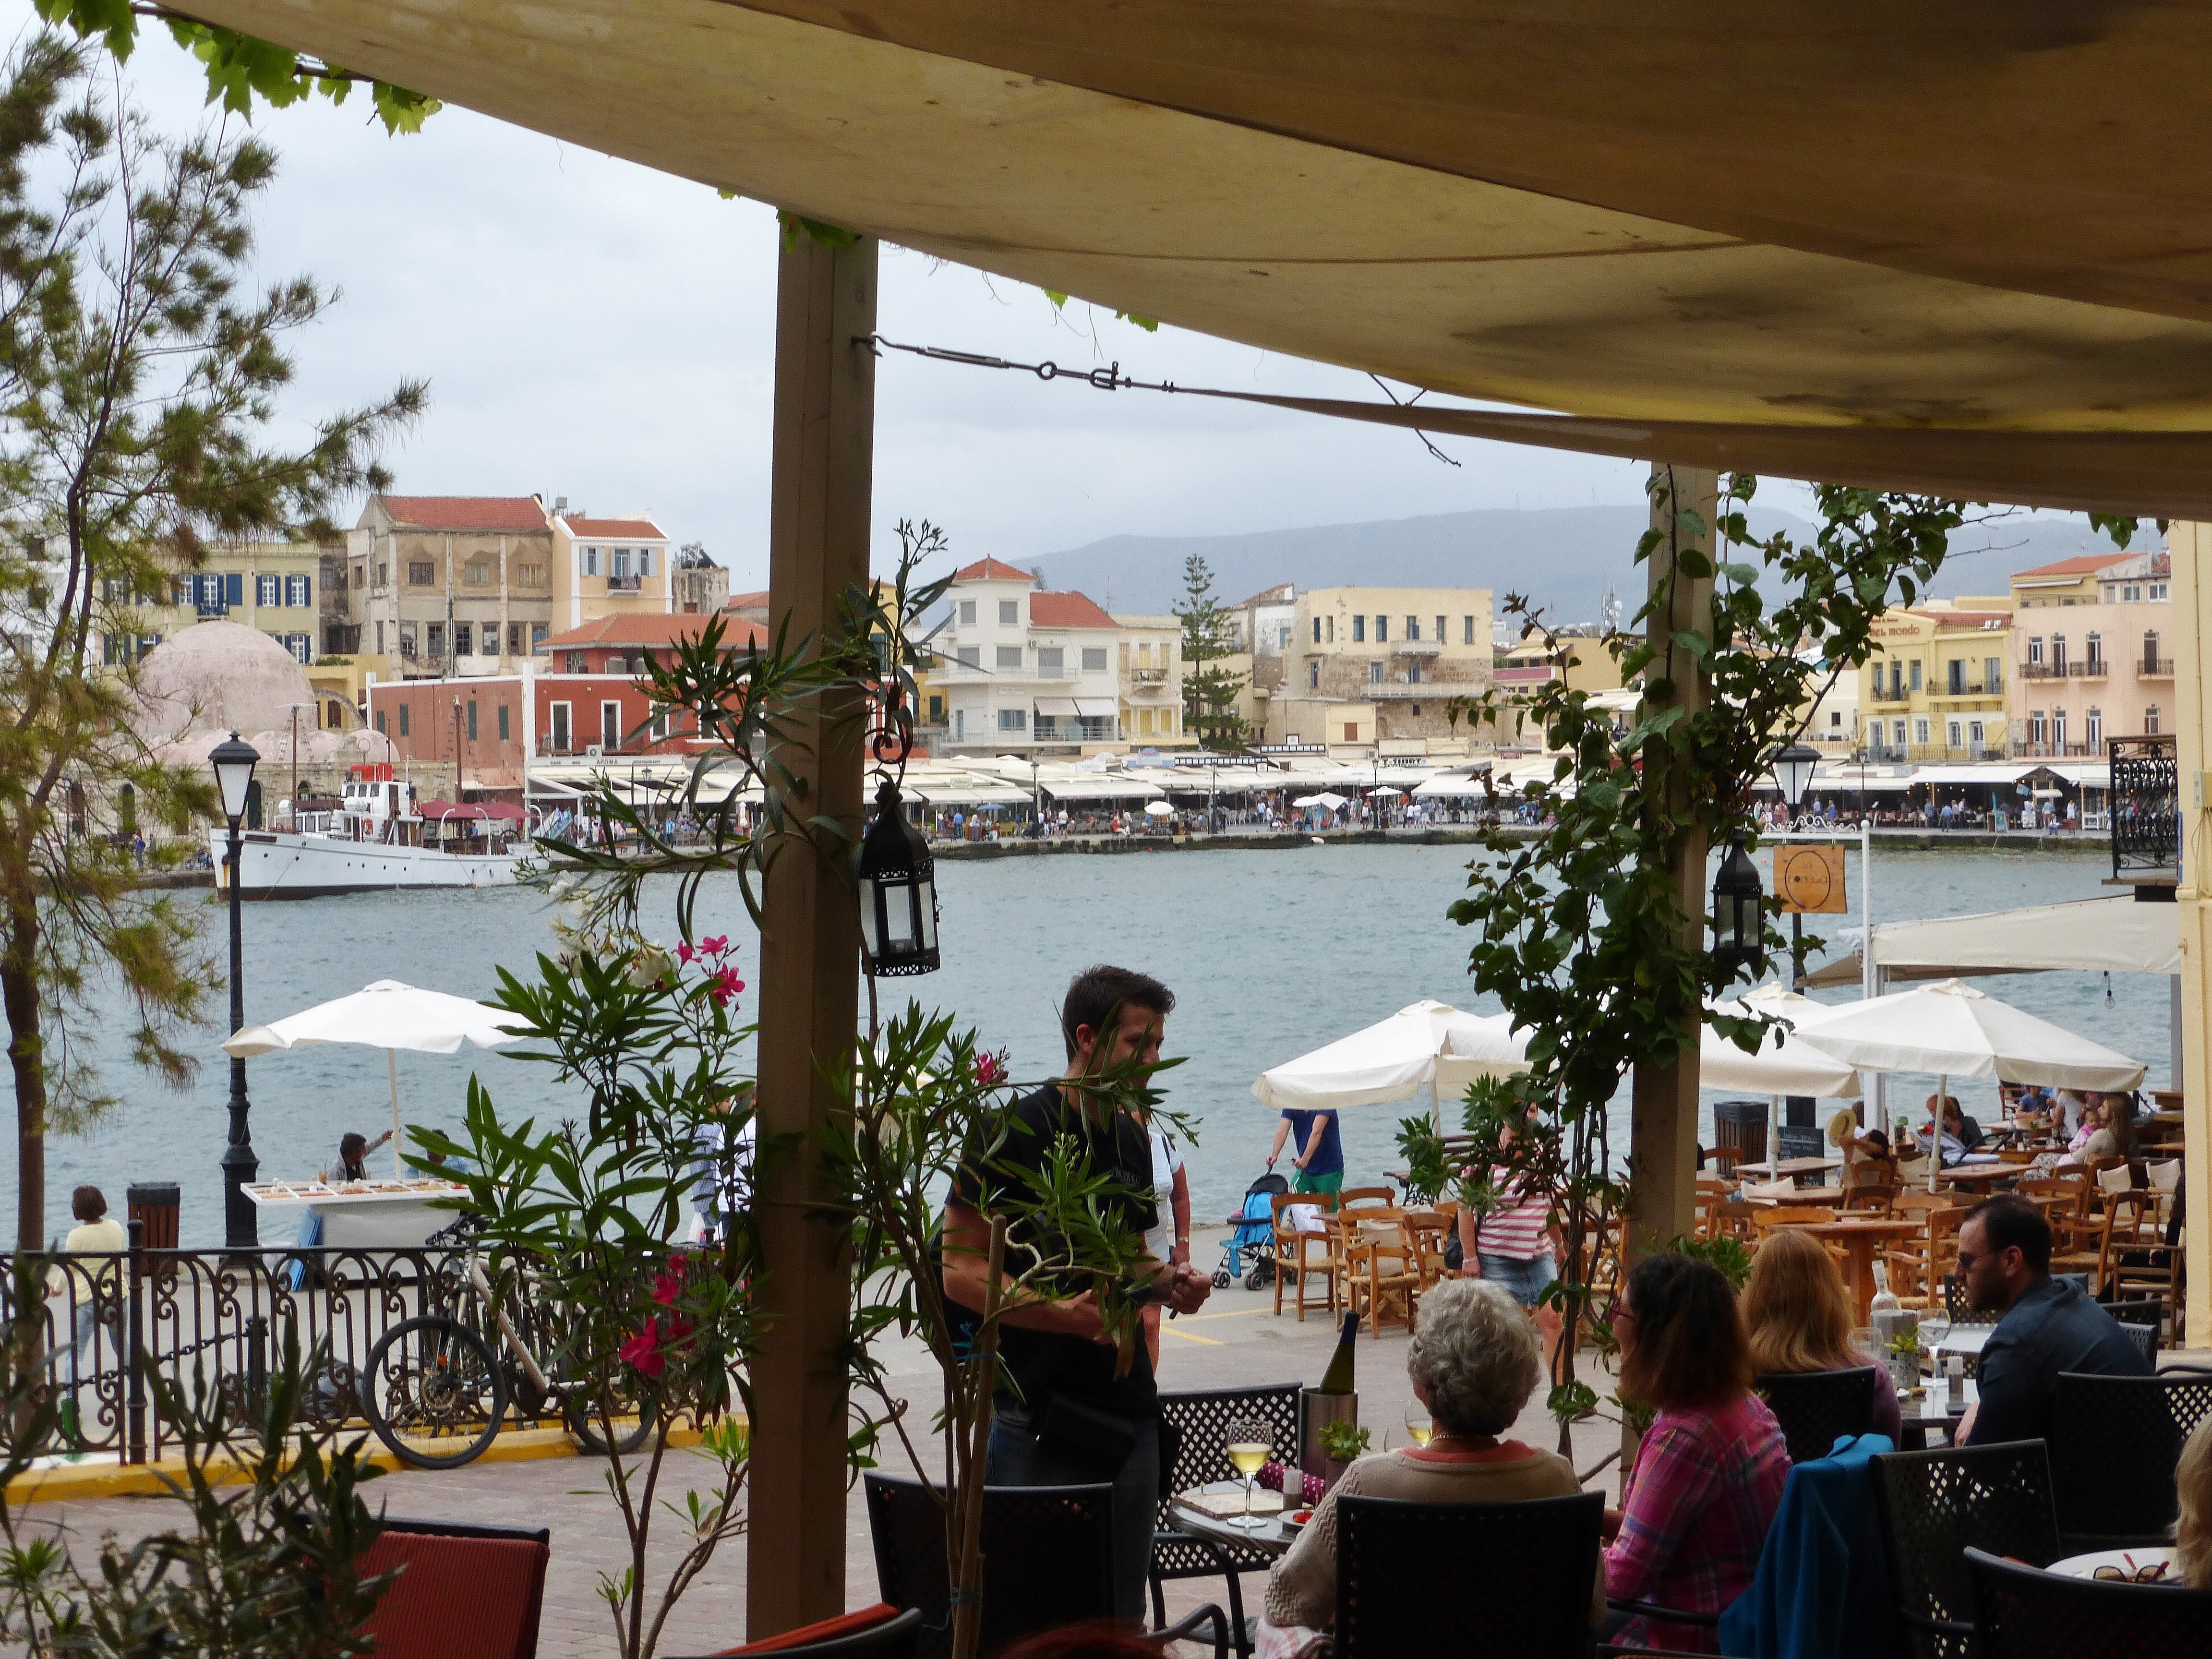 Visiting Chania is another must, which should include some people watching, at Al Canea on the harbour front